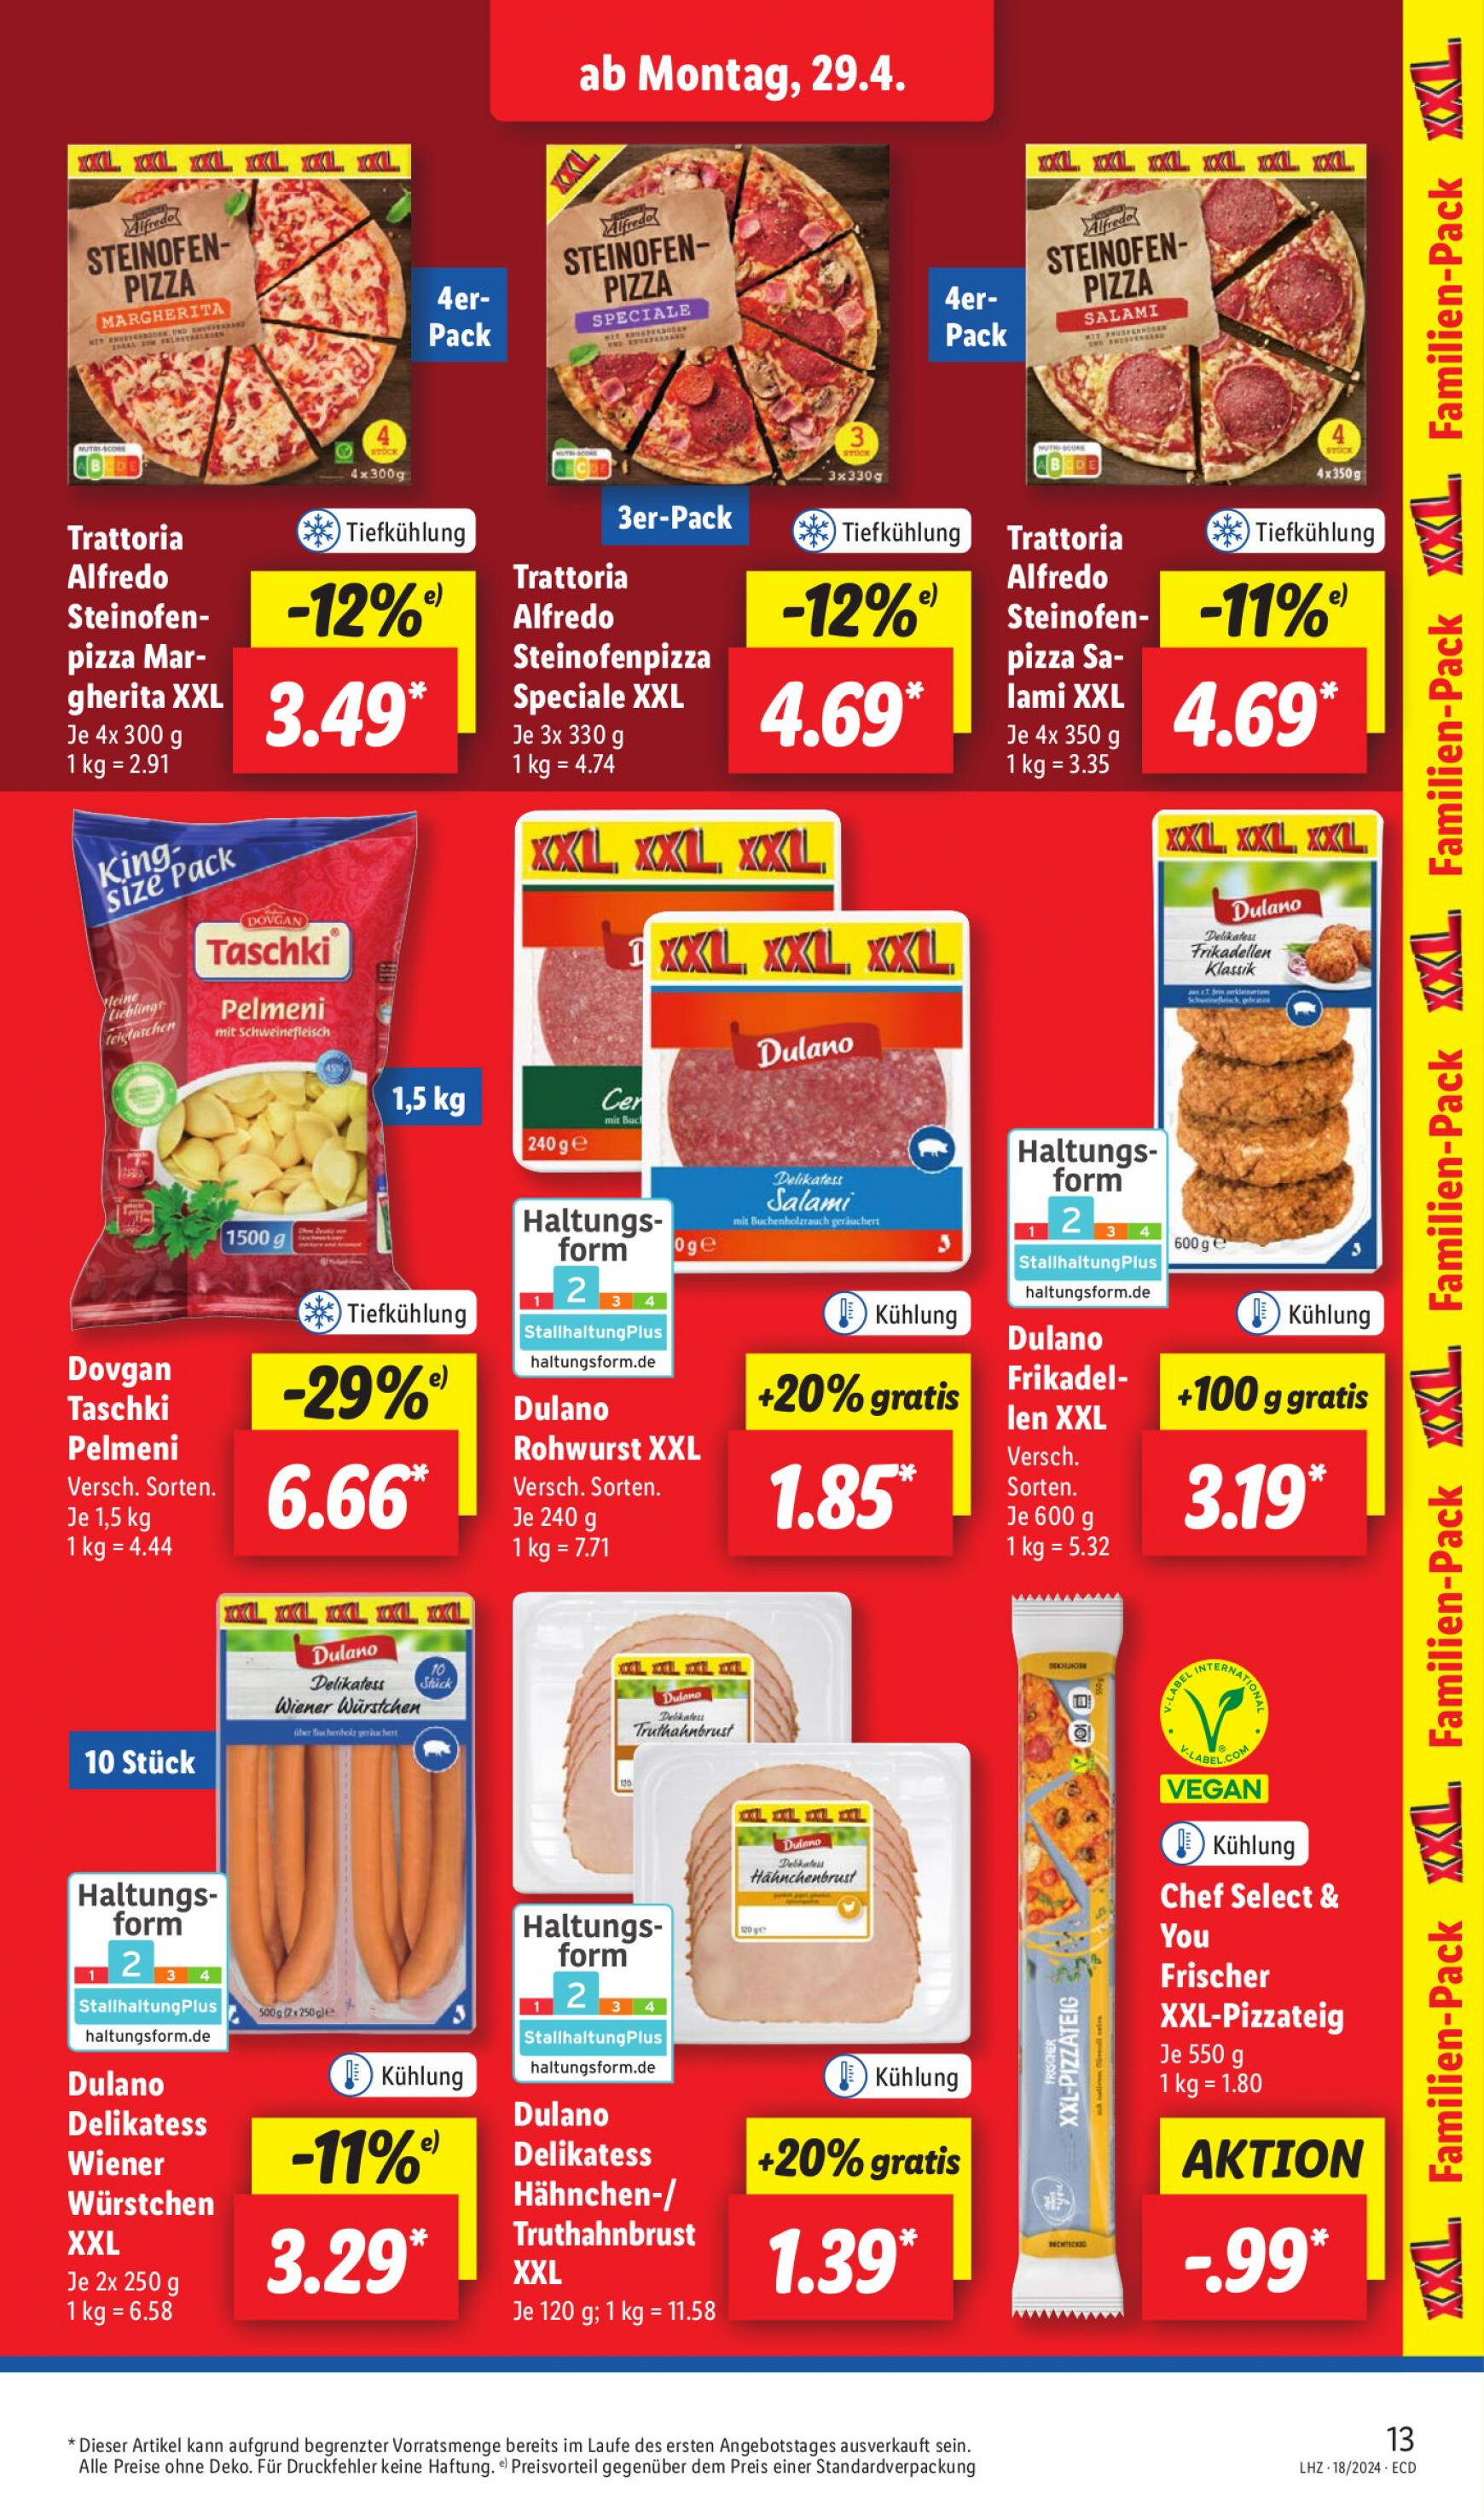 lidl - Flyer Lidl aktuell 29.04. - 04.05. - page: 17